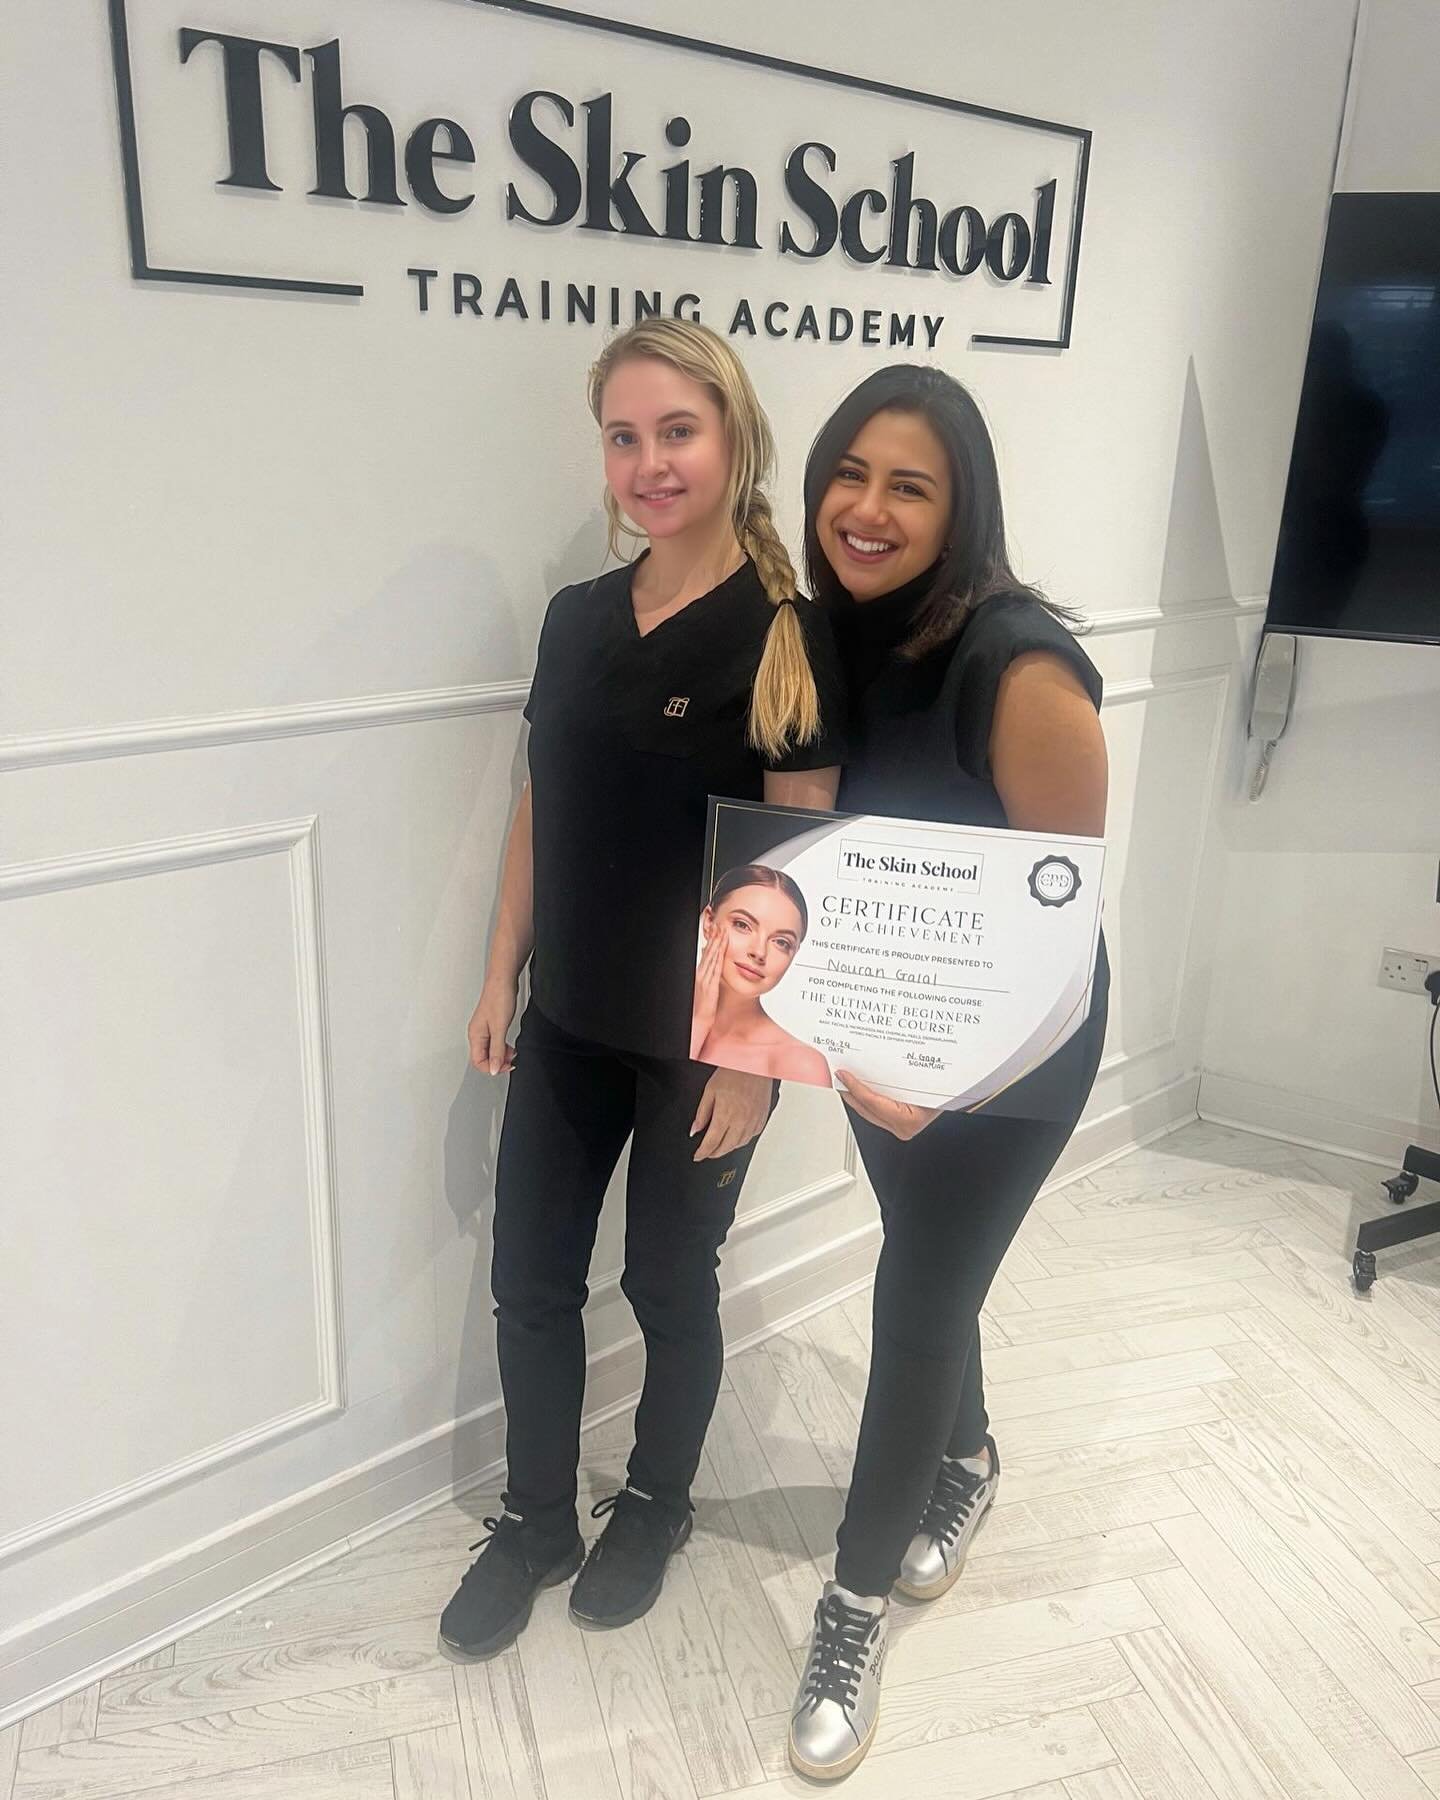 Big congratulations to our students who completed the ultimate skin course last week! We look forward to seeing you on your skin care journeys✨

One of our students even flew from Egypt to join us, we take this as a huge compliment and we can&rsquo;t